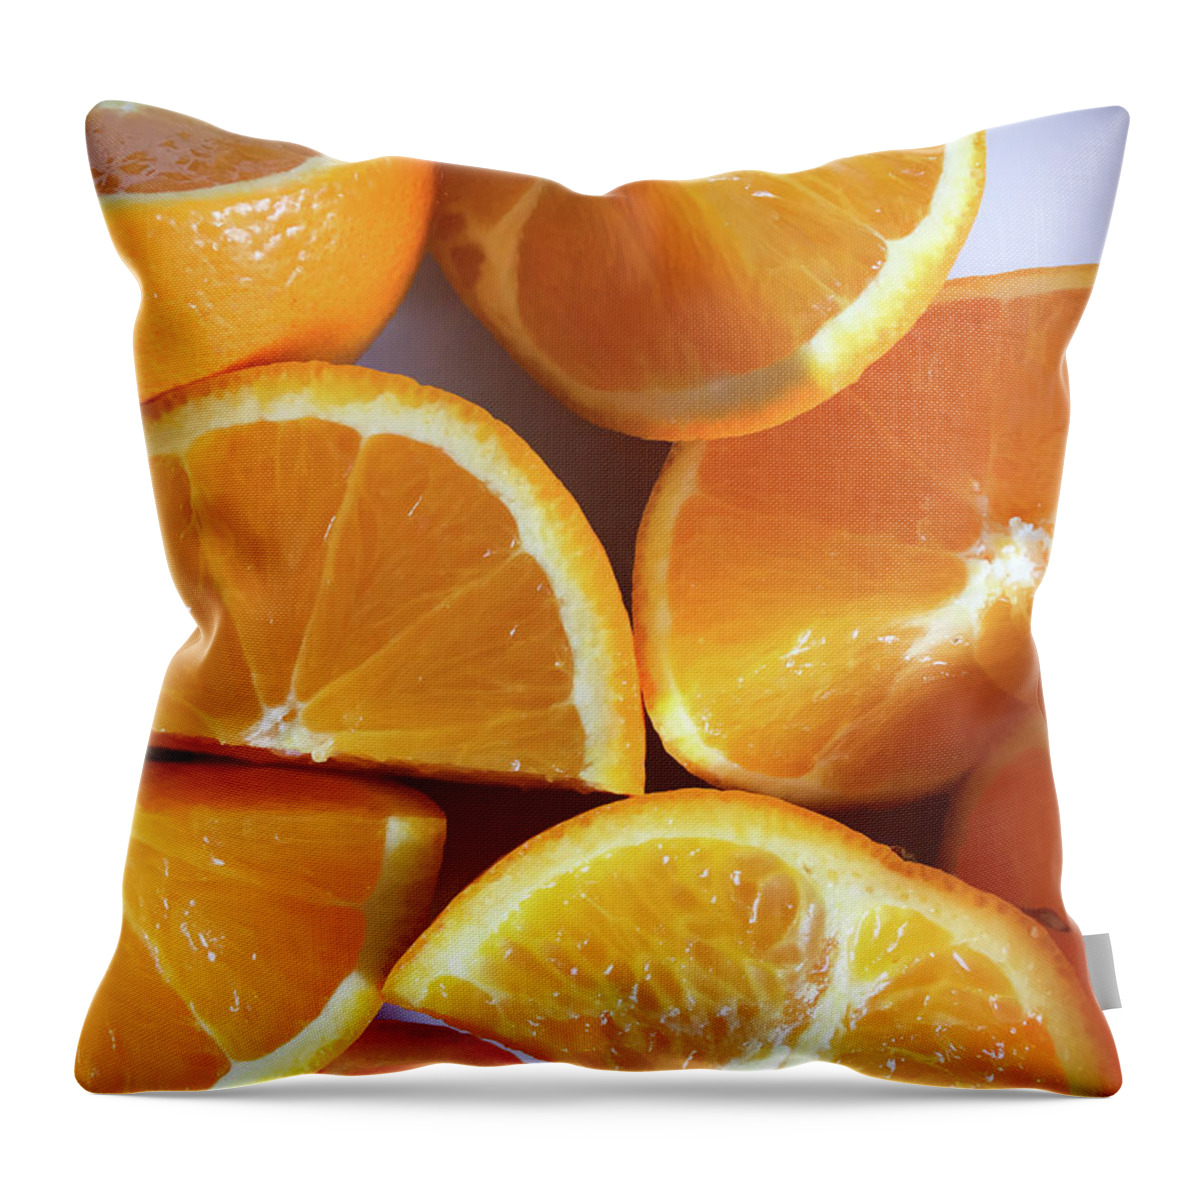 Chopped Throw Pillow featuring the photograph Orange segments by Tom Gowanlock